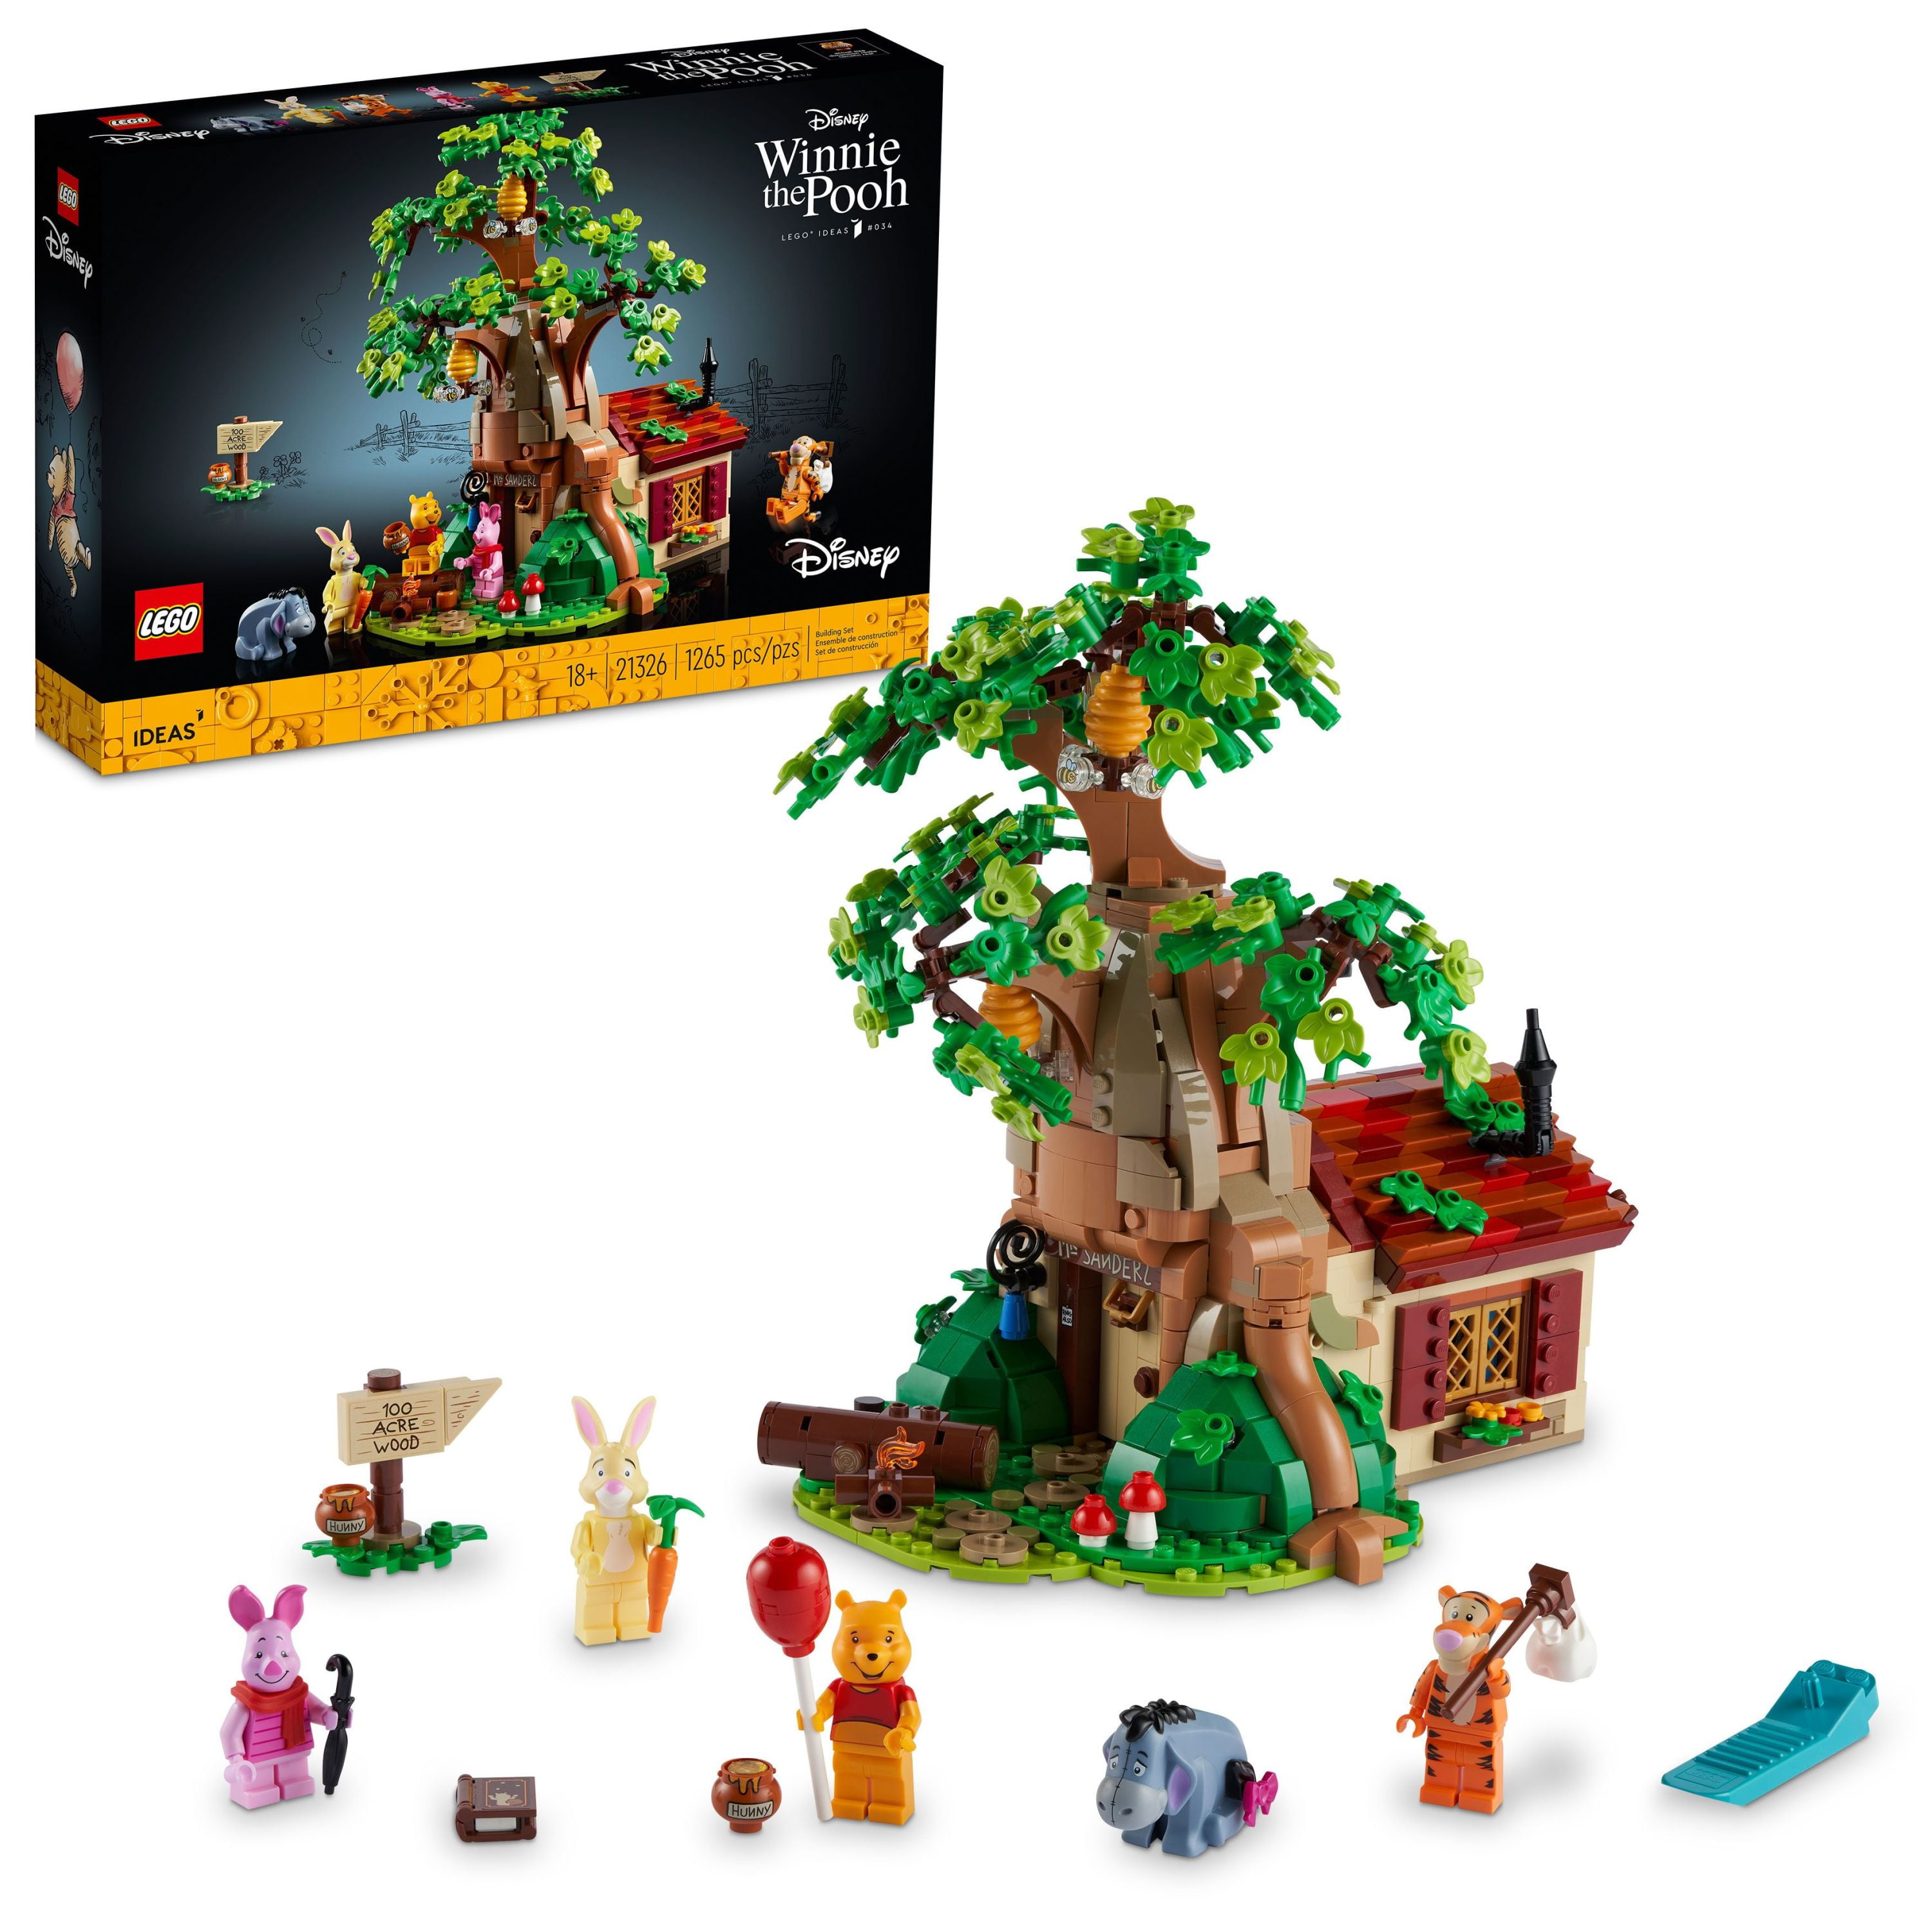 LEGO Disney Winnie The Pooh 21326 Building Set - Home Décor with Piglet Minifigure and Eeyore Figure, Pooh Bear House Opens for Access, Classic Display Model for Adults -